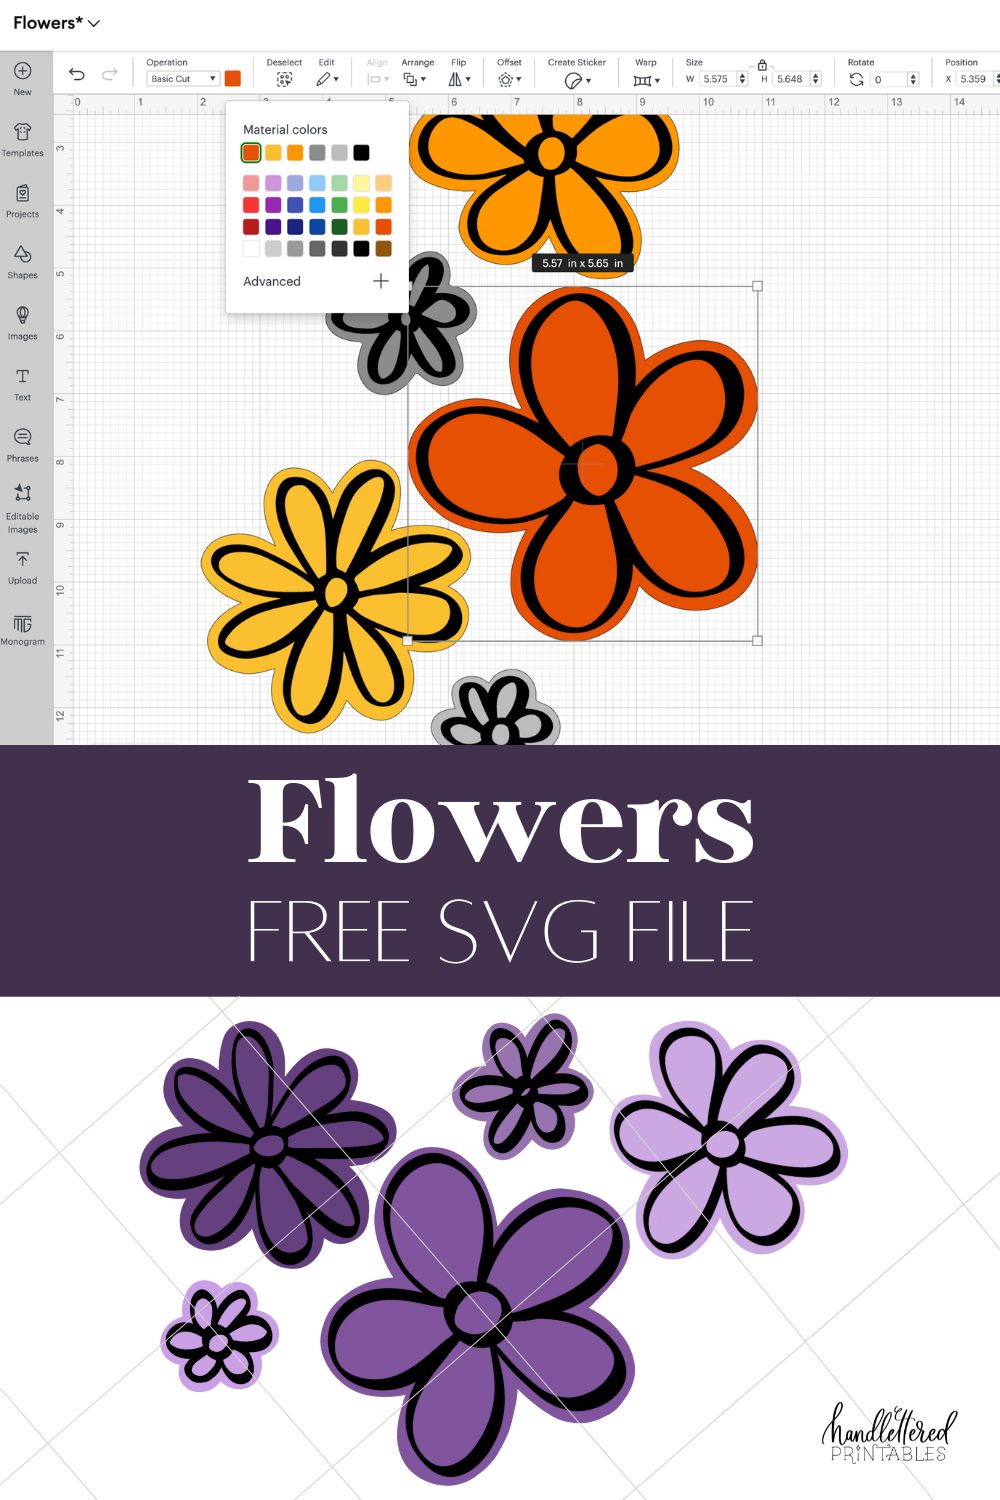 2 Layer cut file of 5 hand drawn flowers (free) shown on a white background, top image shows cut file loaded into Cricut Design space with each flower background a different color Title text reads: Flowers Free SVG File